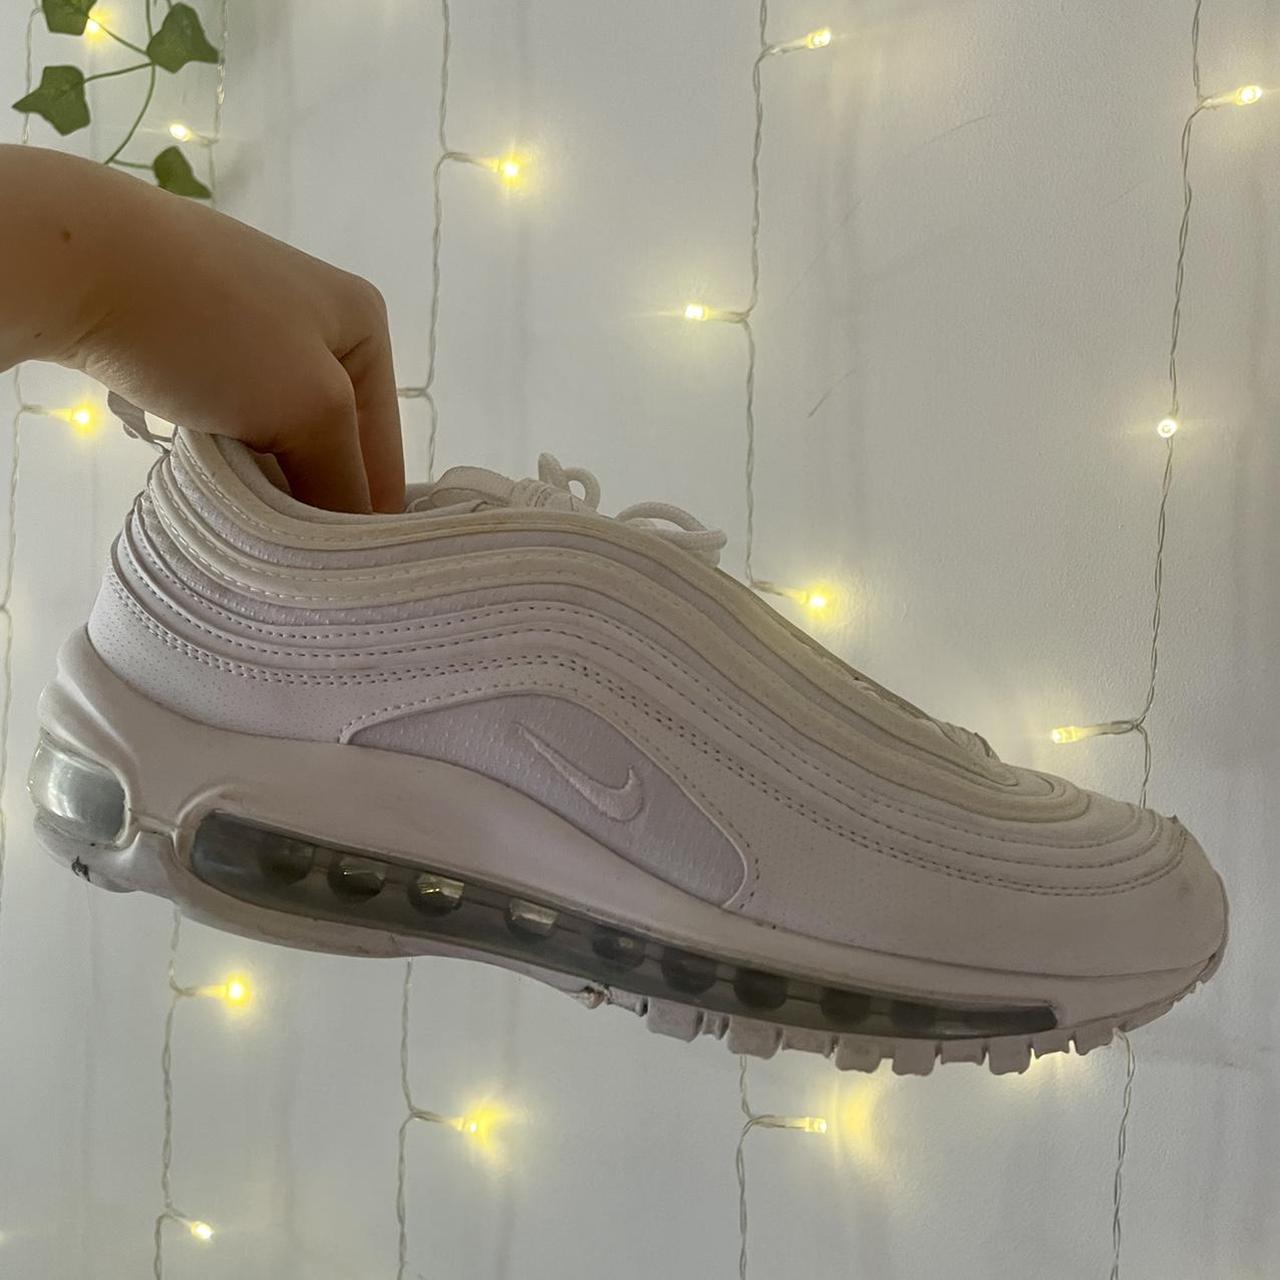 UK Size 6 Triple White Nike Air Max 97 in really... - Depop